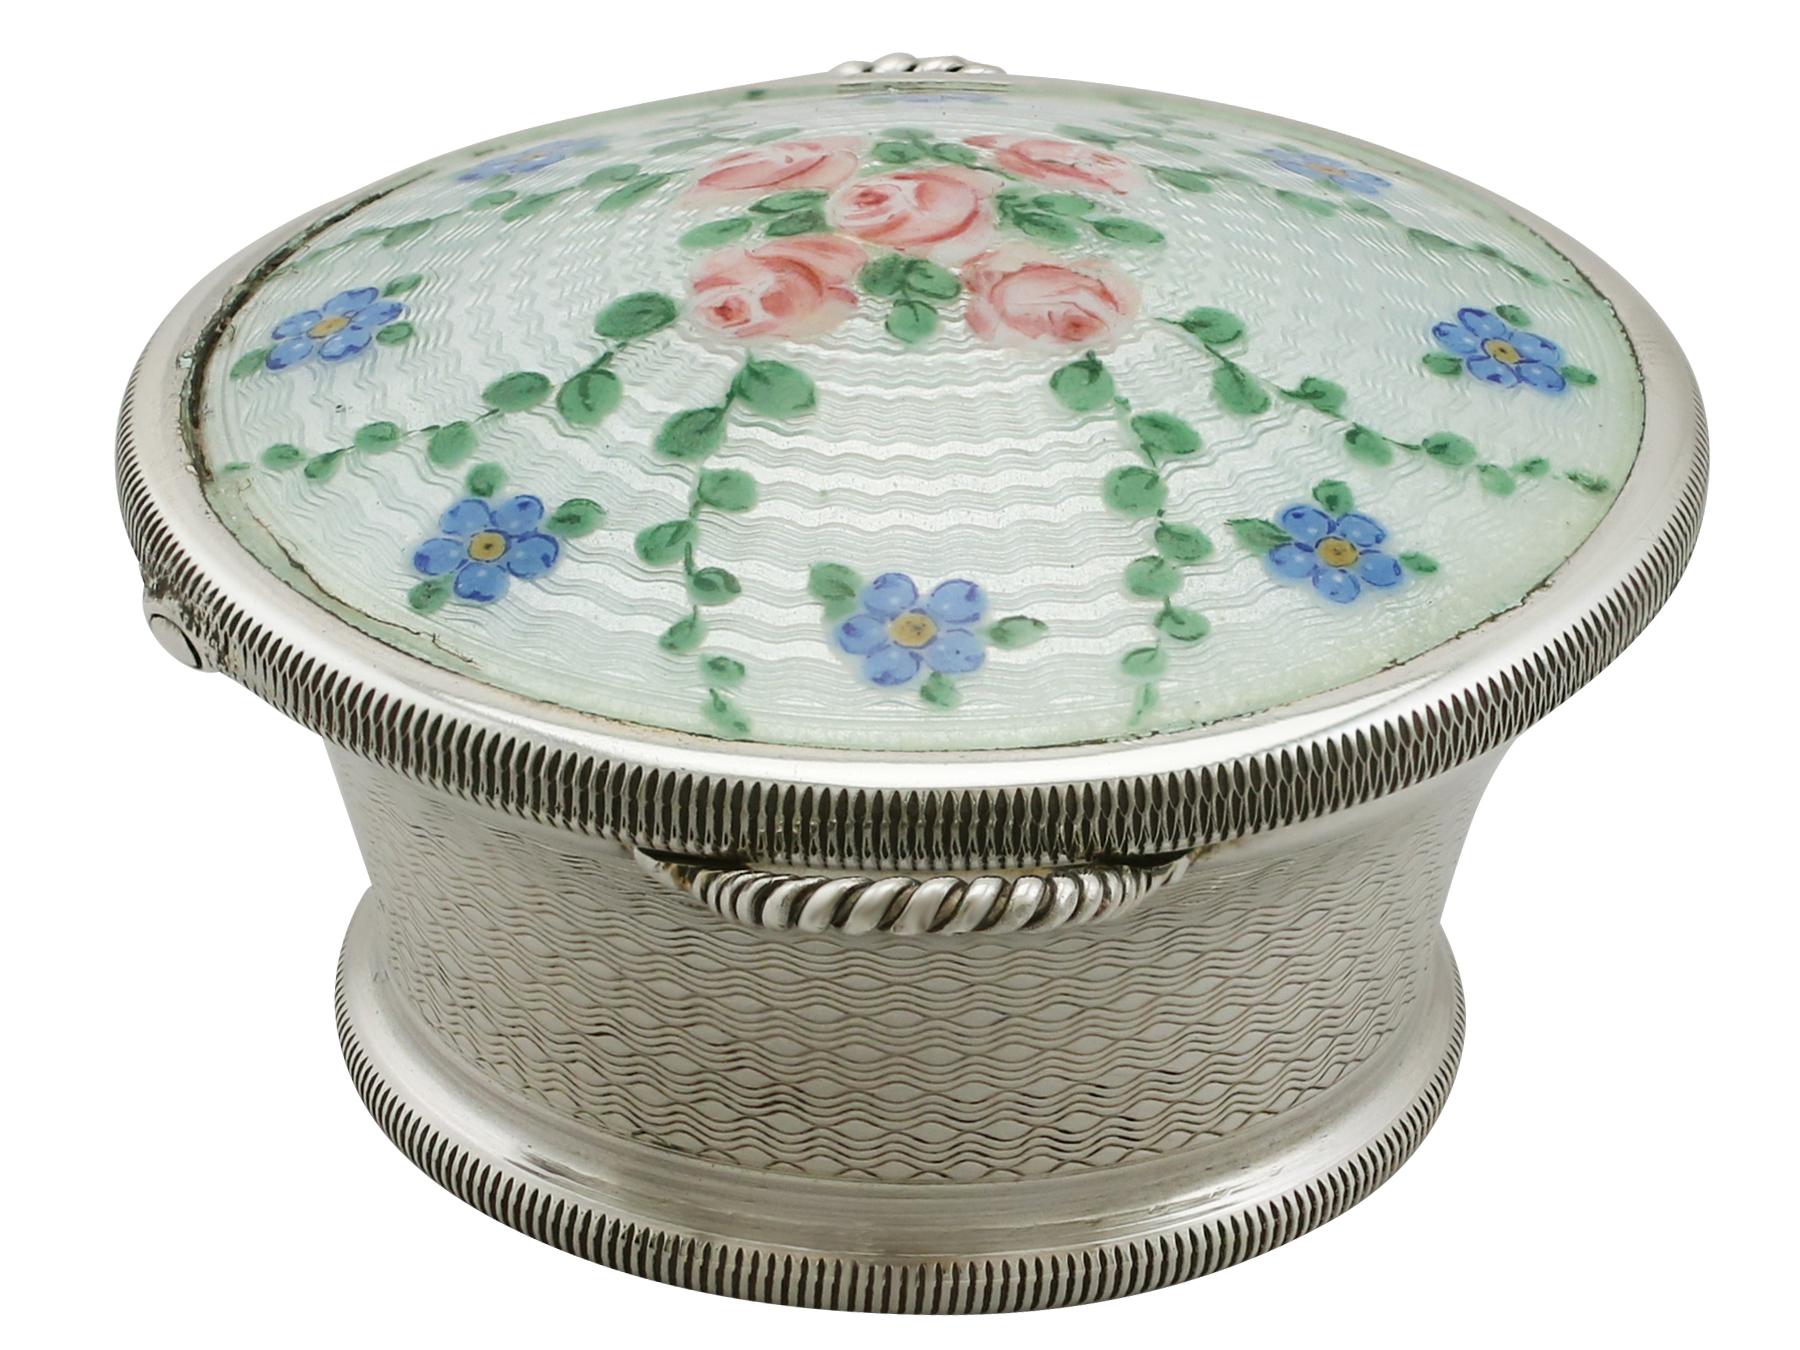 An exceptional, fine and impressive antique George V English sterling silver and enamel trinket box made by Levi and Salaman; an addition to the ornamental silverware collection.

This exceptional antique George V sterling silver box has a